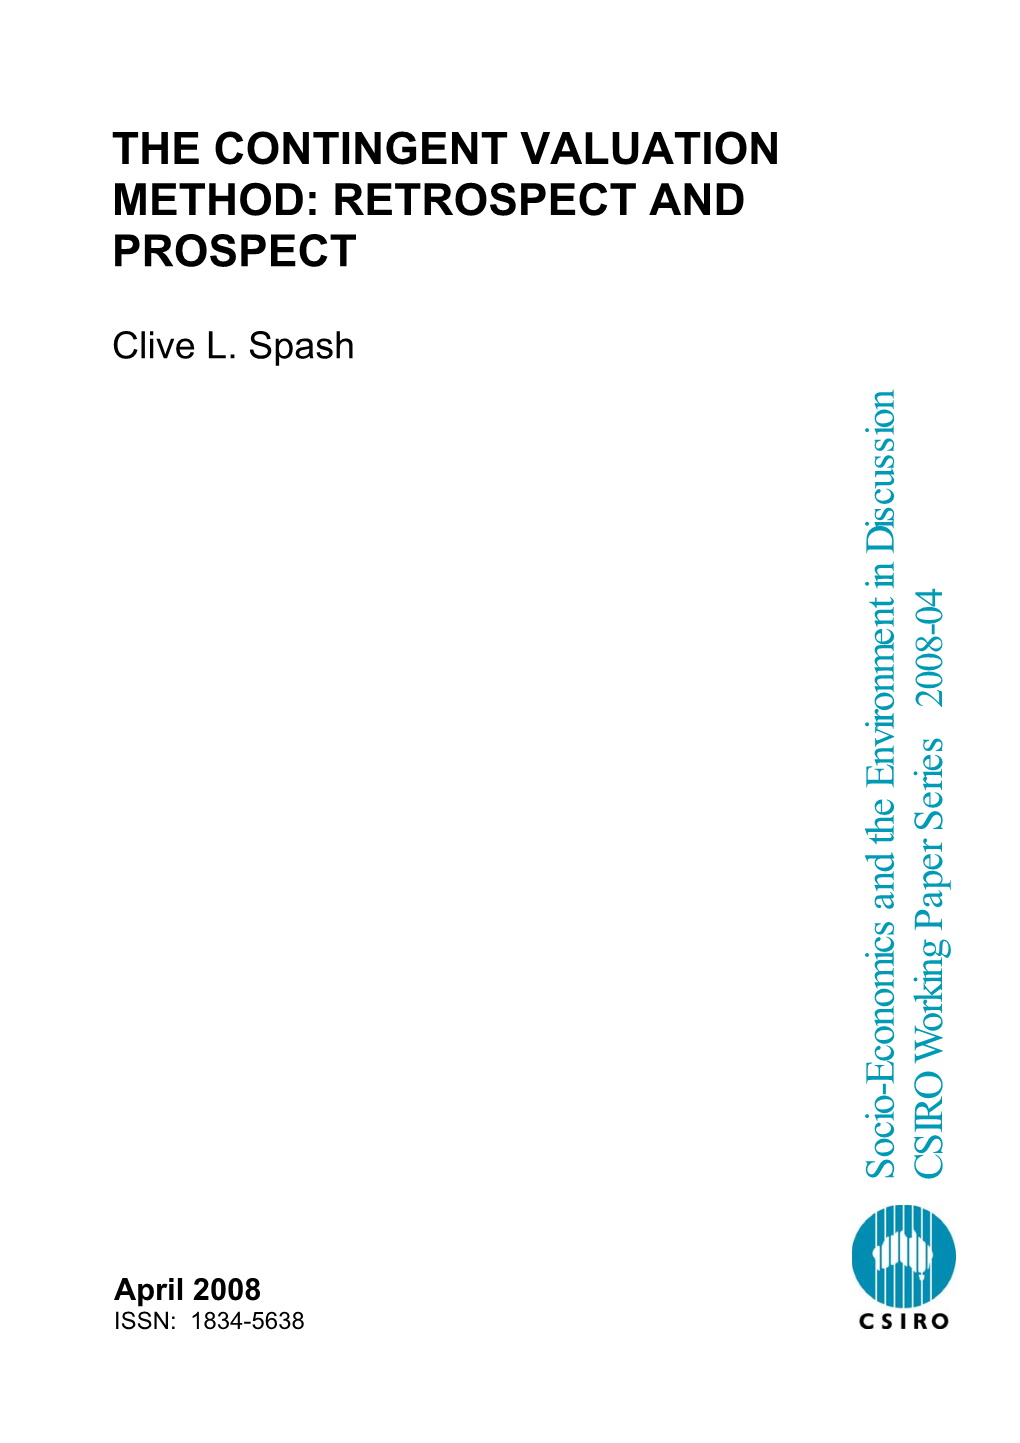 The Contingent Valuation Method: Retrospect and Prospect